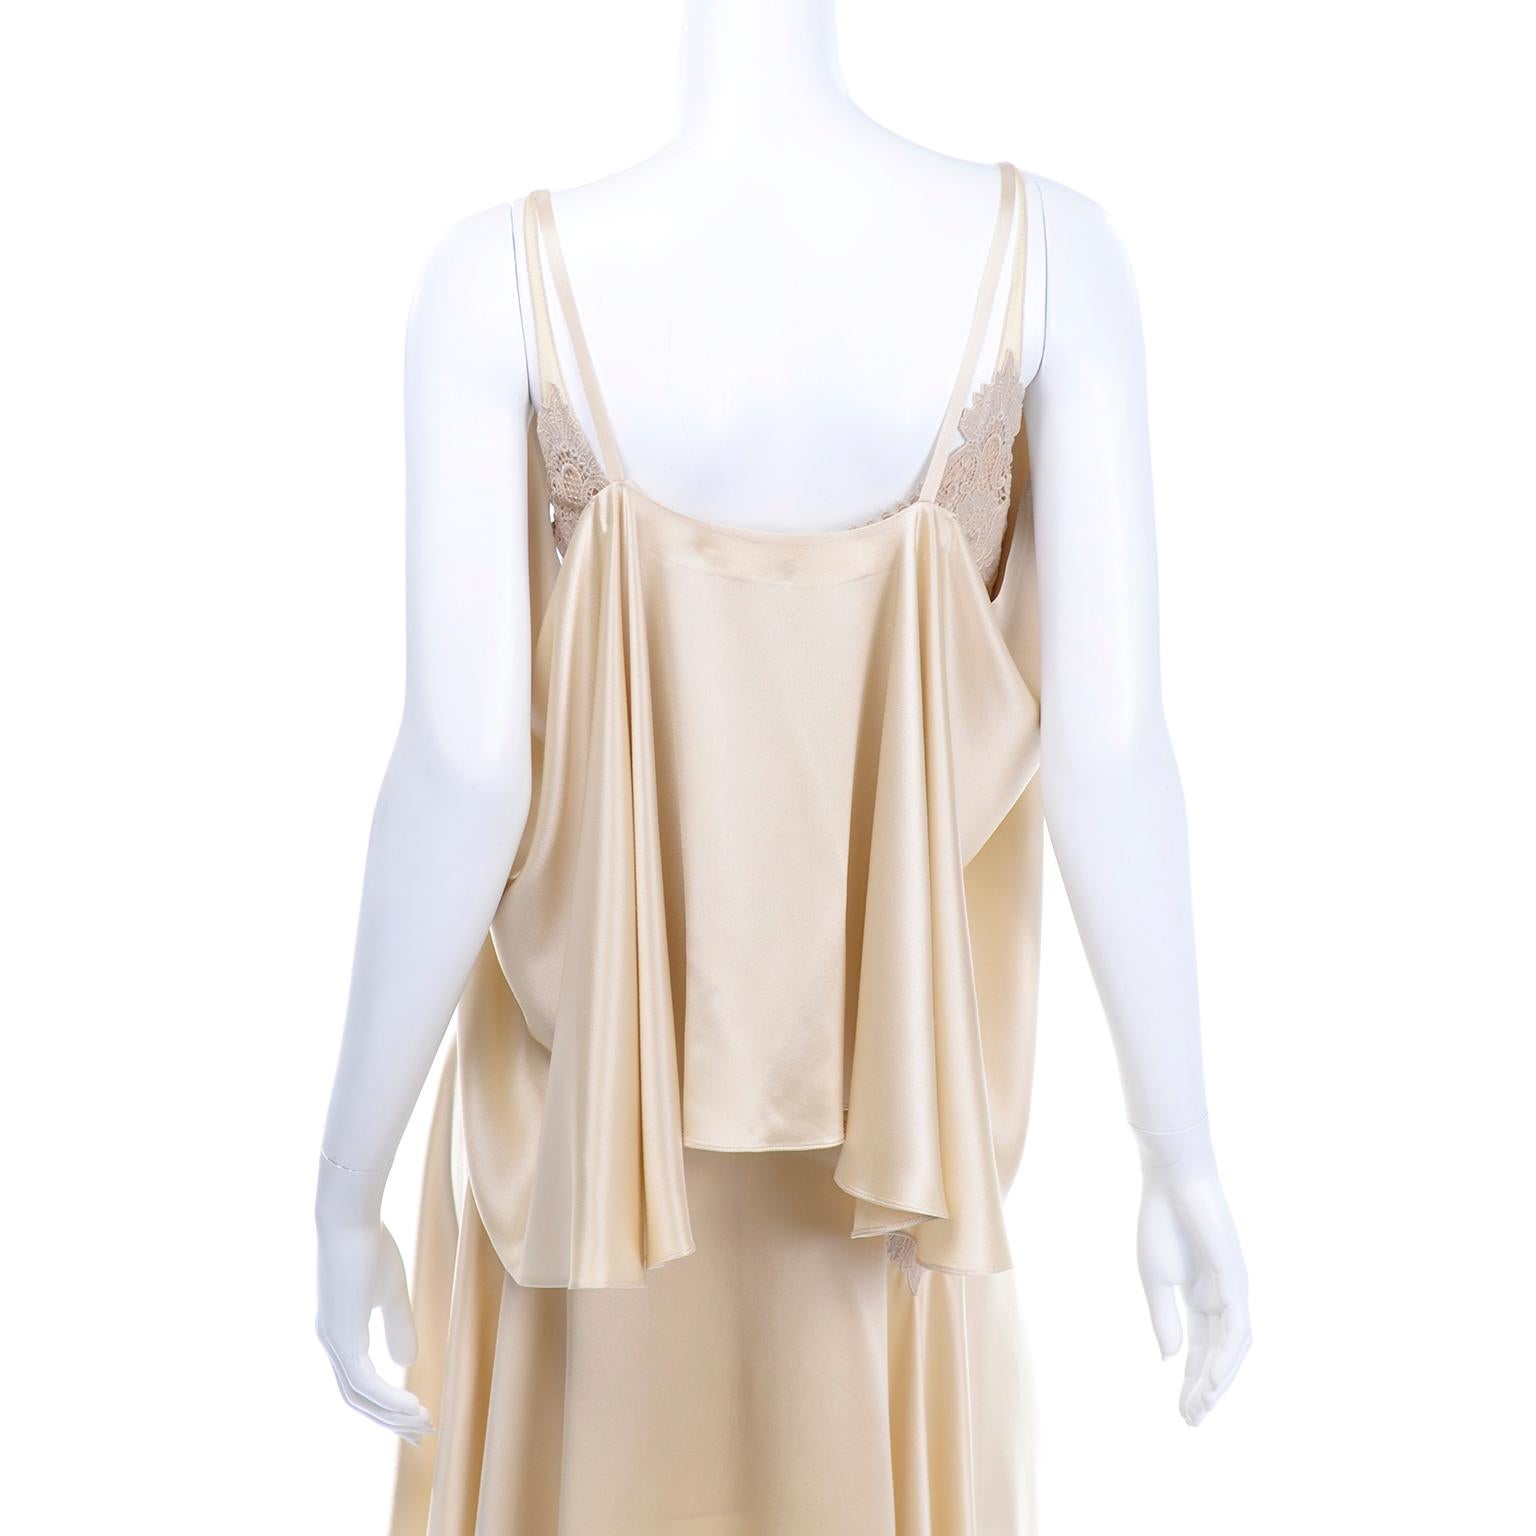 2005 Alexander McQueen Champagne Silk & Lace Slip Dress With Sleeveless Wrap Top 3